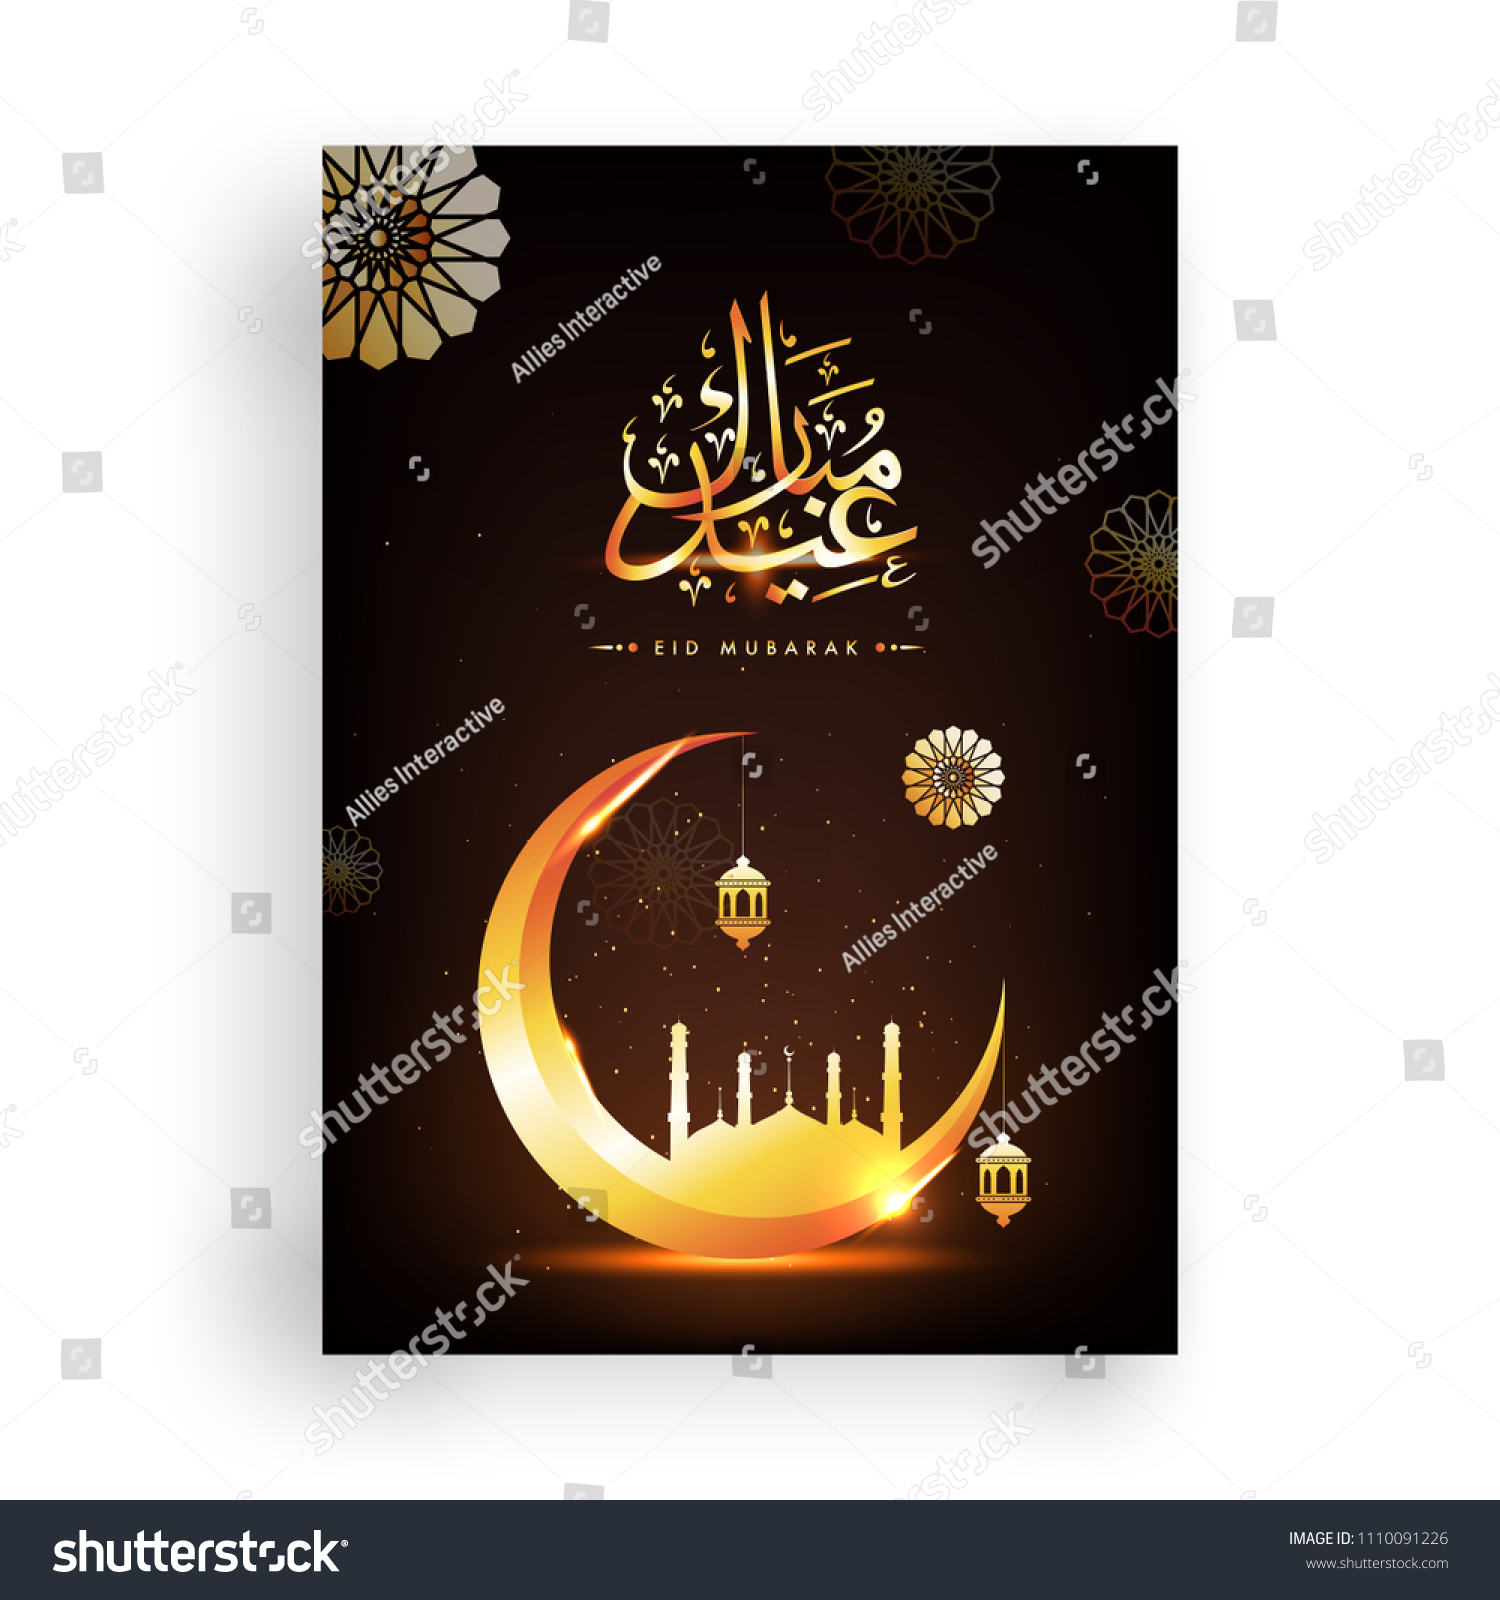 Golden glossy crescent moon, mosque with hanging lanterns and arabic calligraphic text Eid Mubarak on floral background, greeting card design.  #1110091226